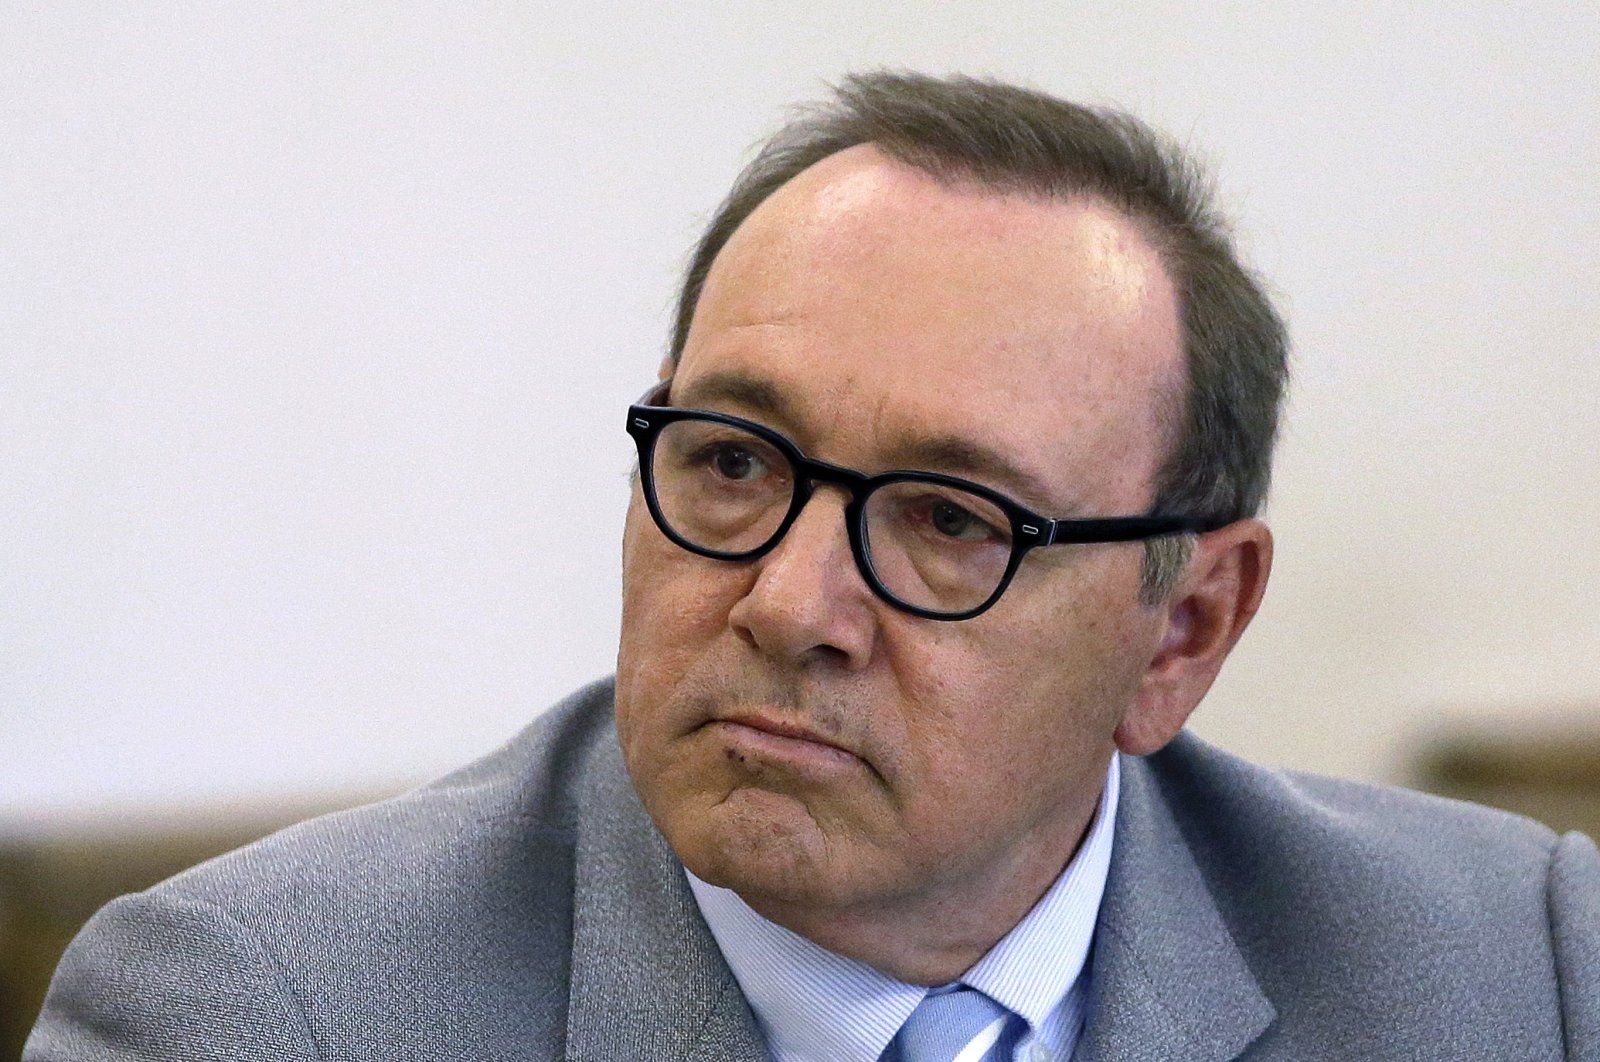 Actor Kevin Spacey attends a pretrial hearing at a district court in Nantucket, Mass., U.S., June 3, 2019. (AP Photo/Steven Senne, File)